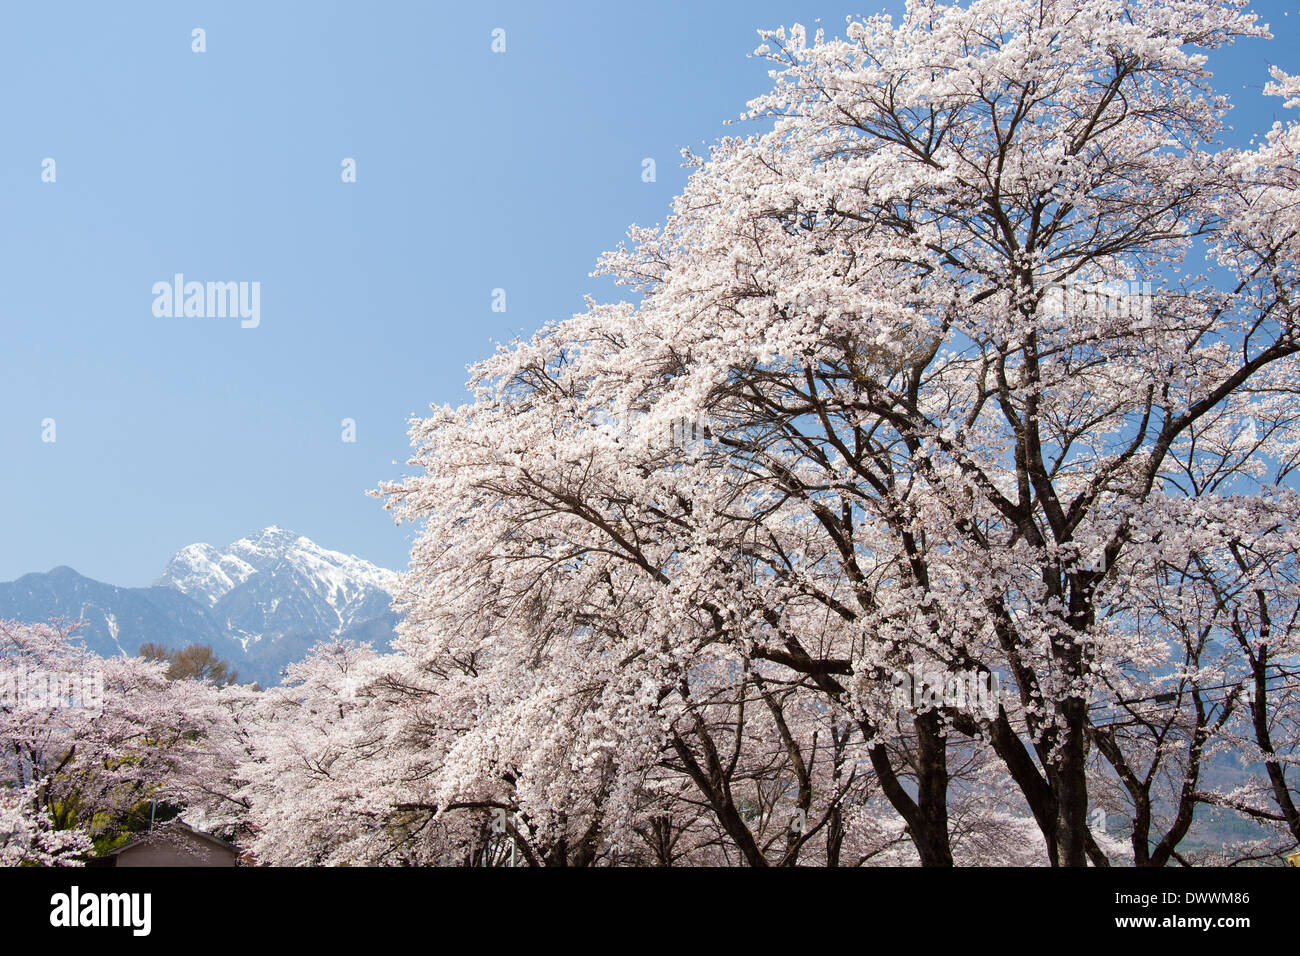 Snowcapped mountain and cherry trees, Yamanashi Prefecture, Japan Stock Photo